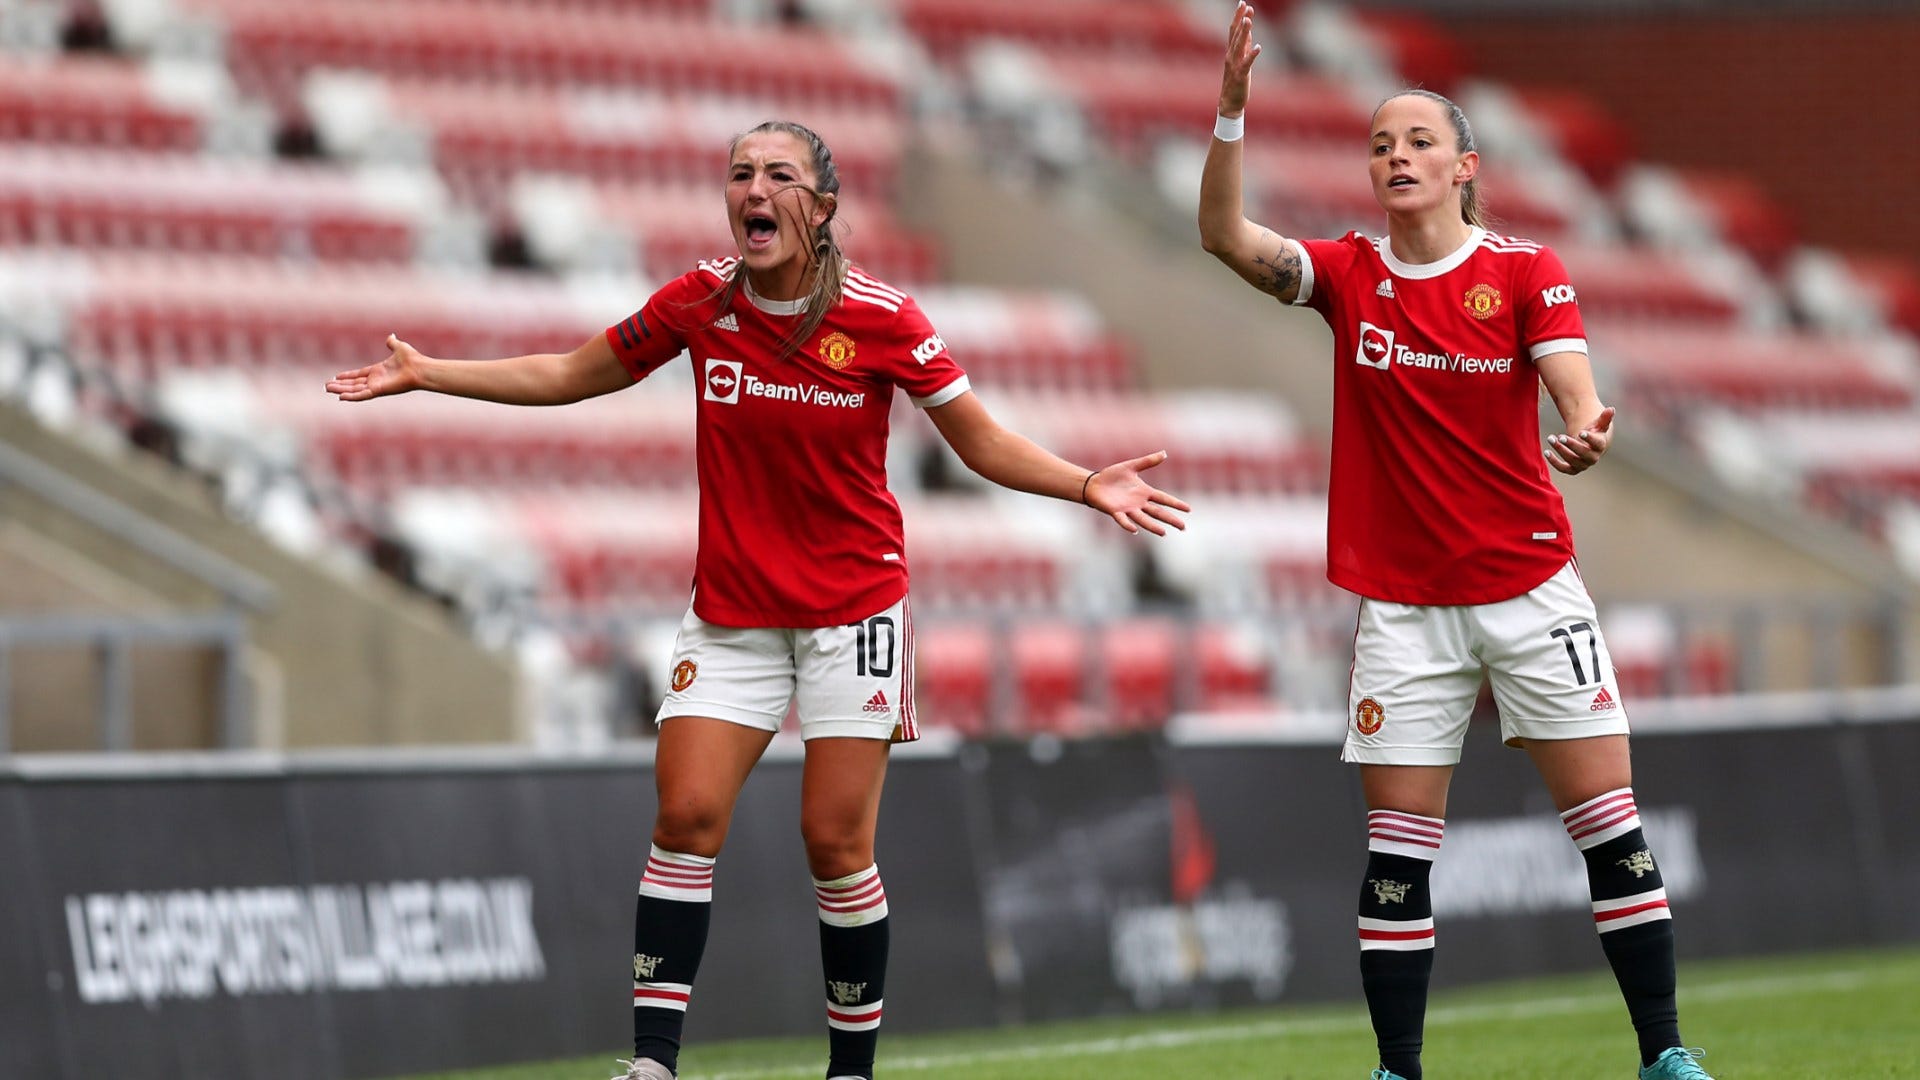 Manchester United Women vs Arsenal Women Where to watch the match online, live stream, TV channels and kick-off time Goal UK